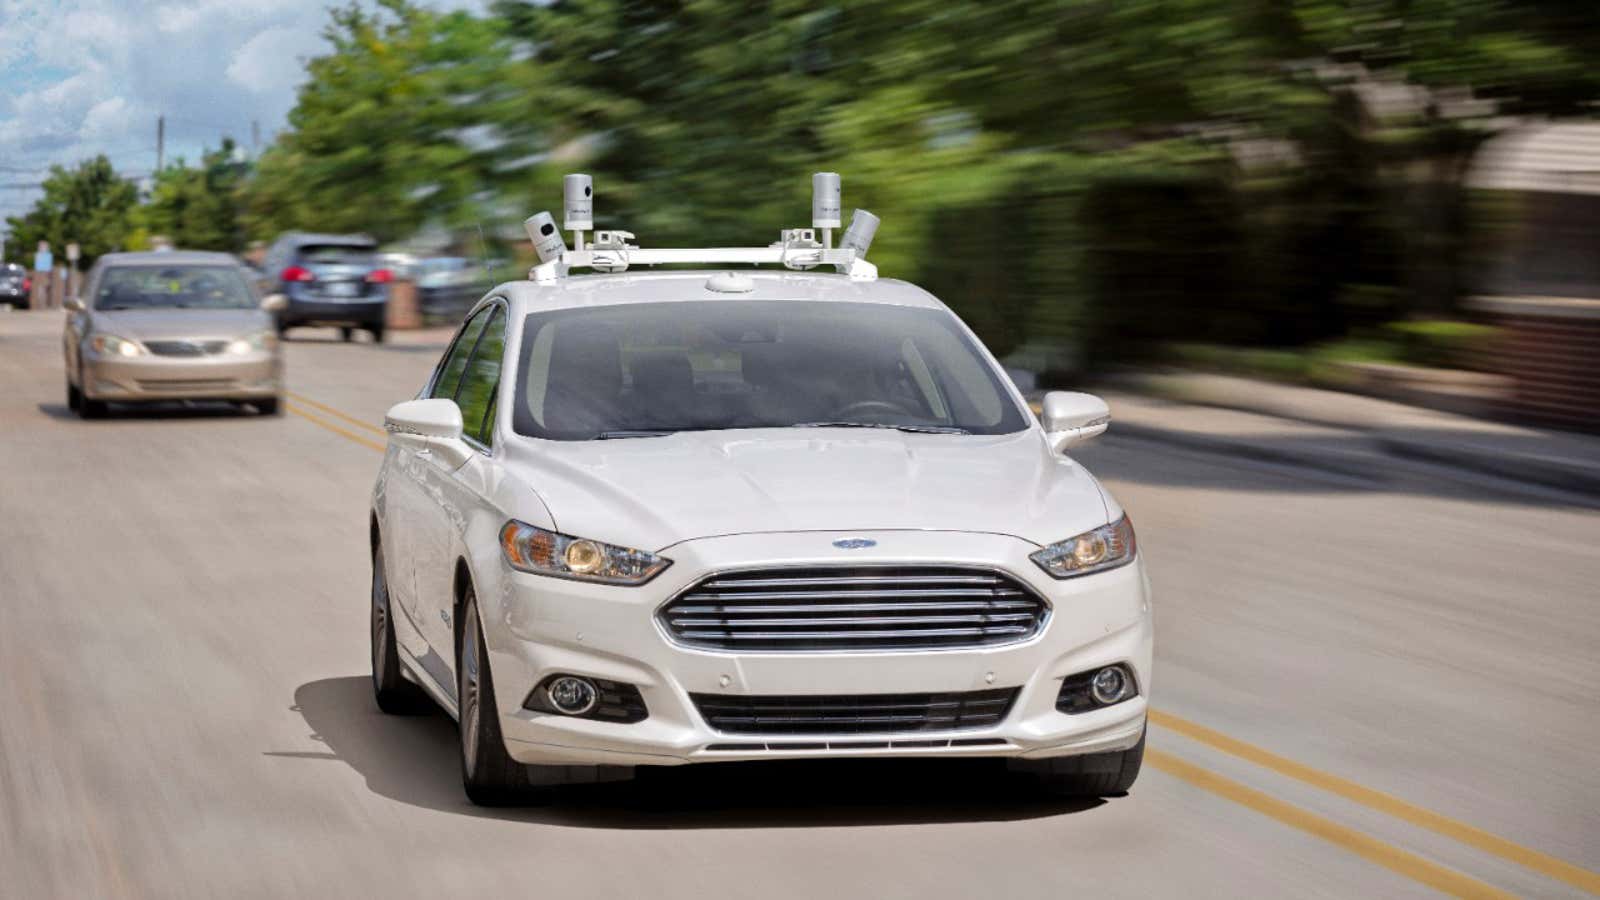 Coming soon: A driverless Ford.